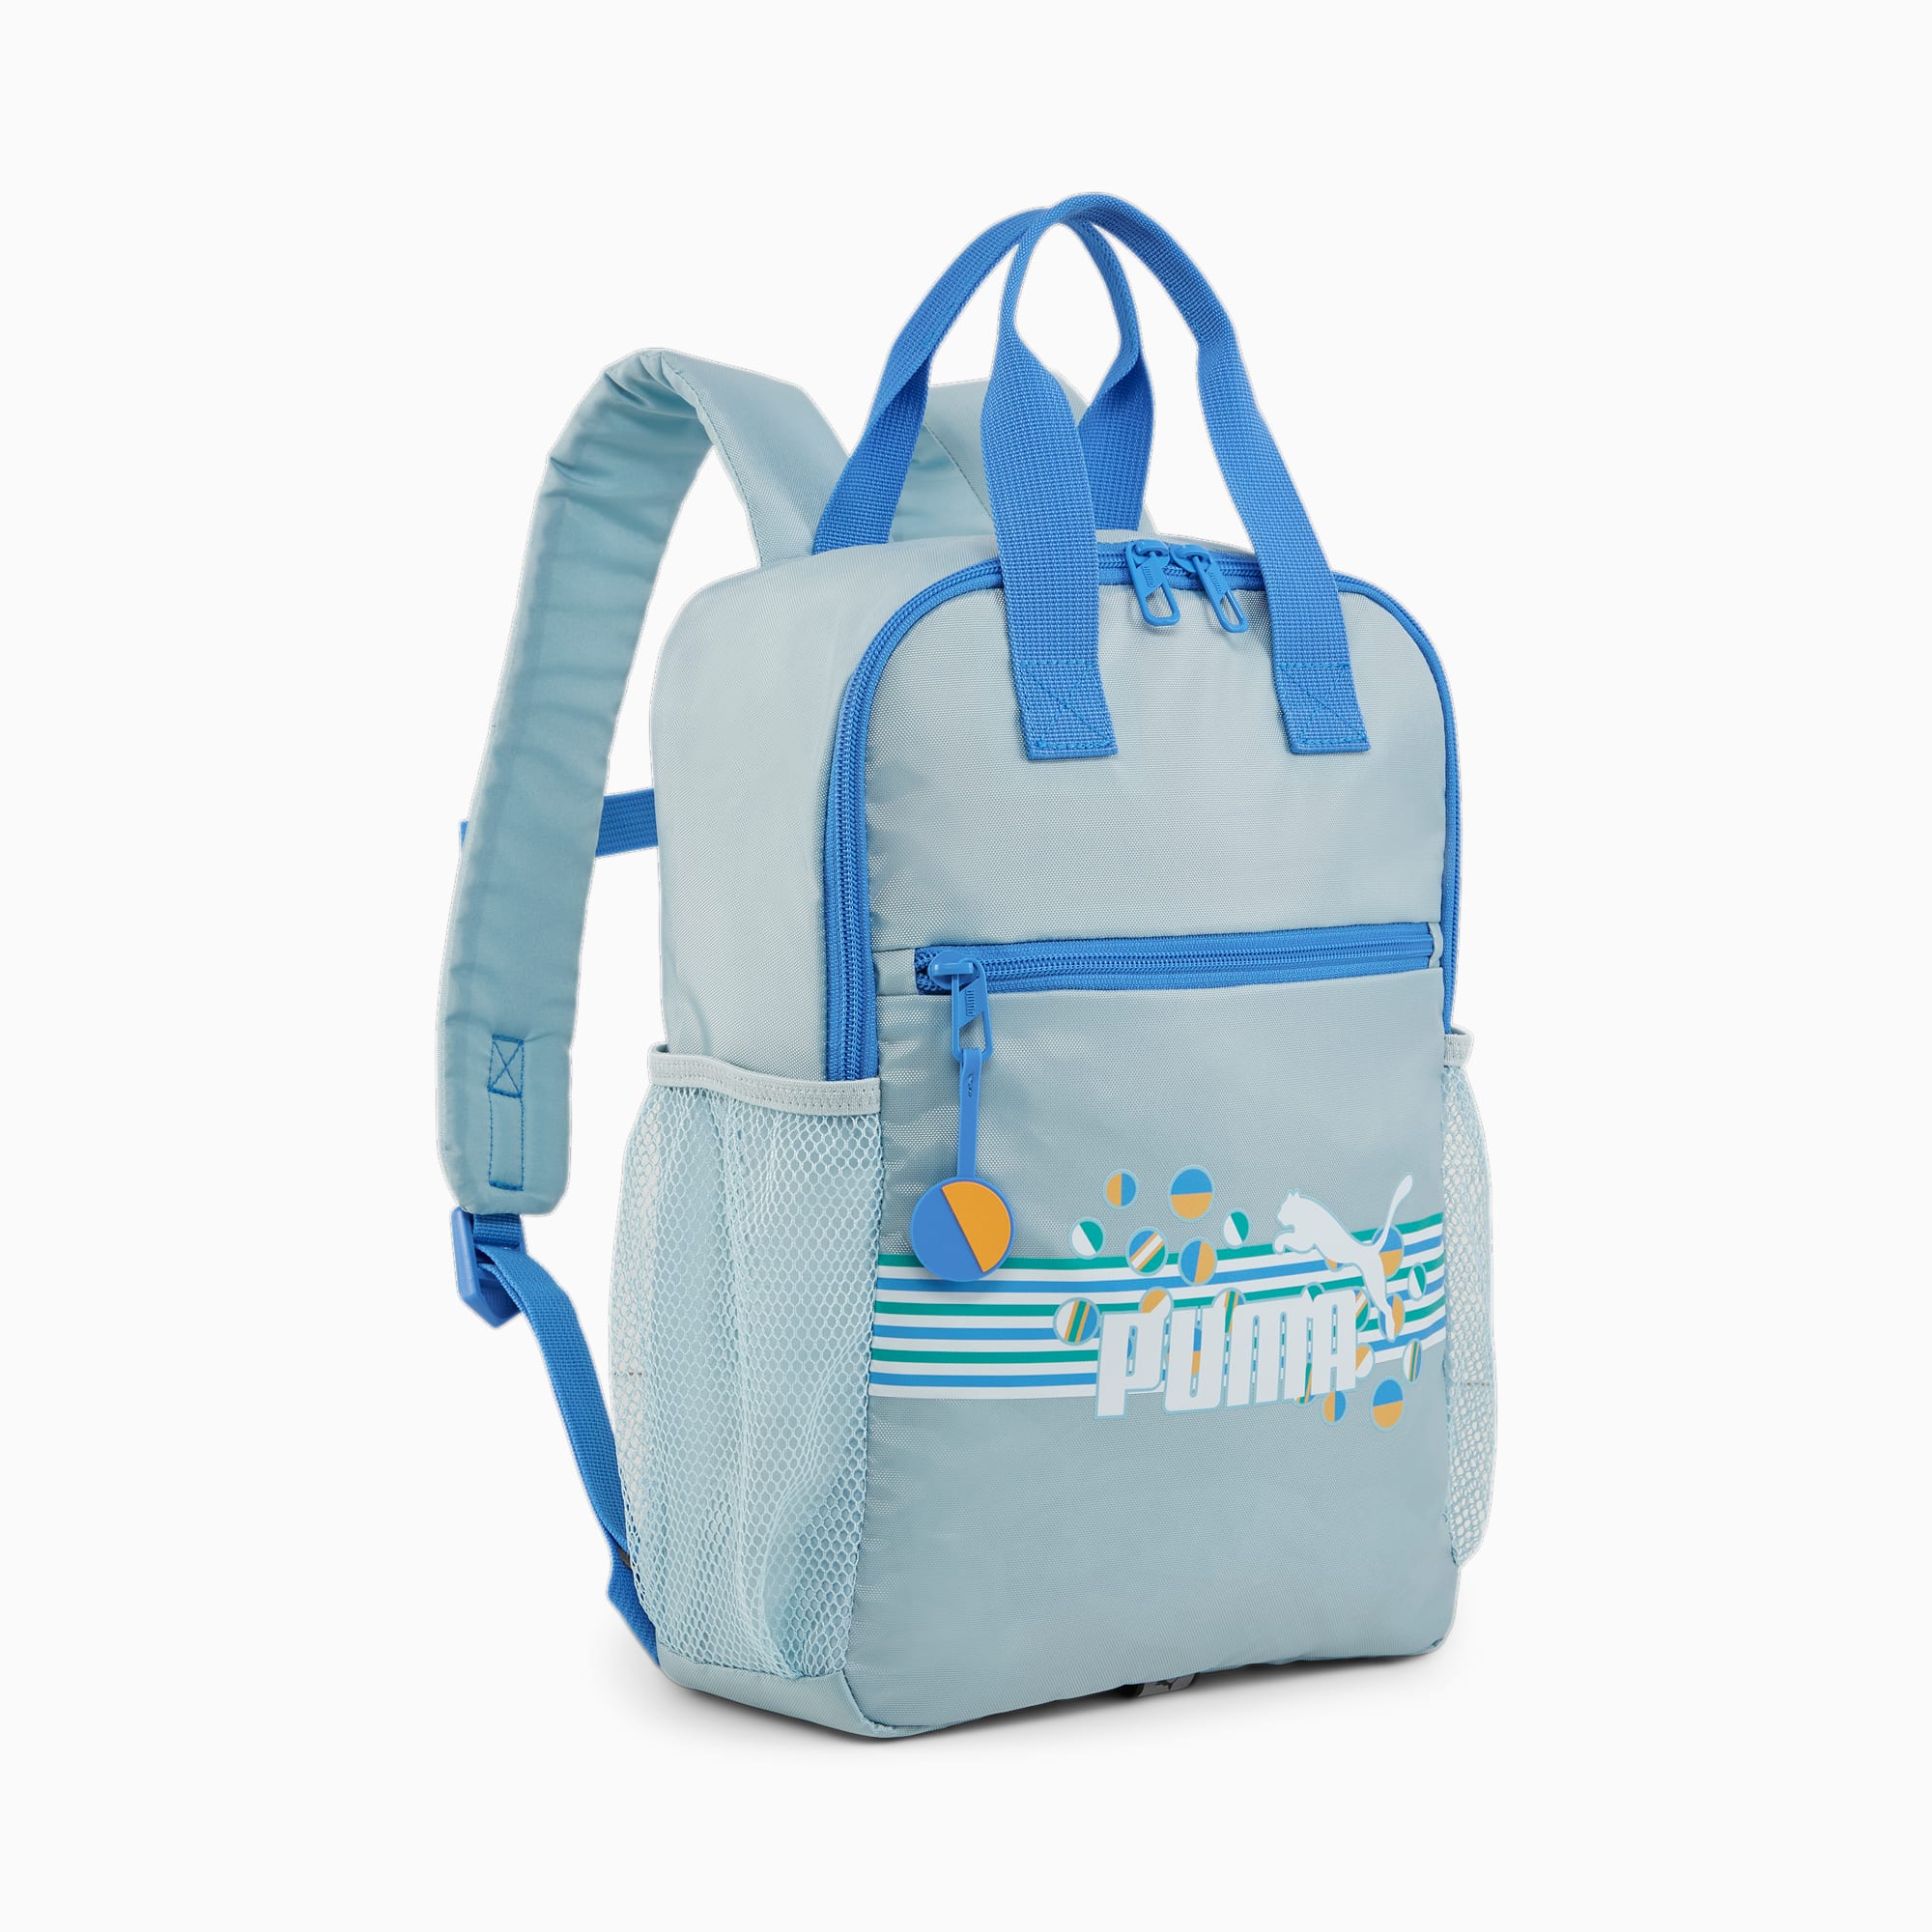 PUMA Summer Camp Youth Backpack, Turquoise Surf, Accessories